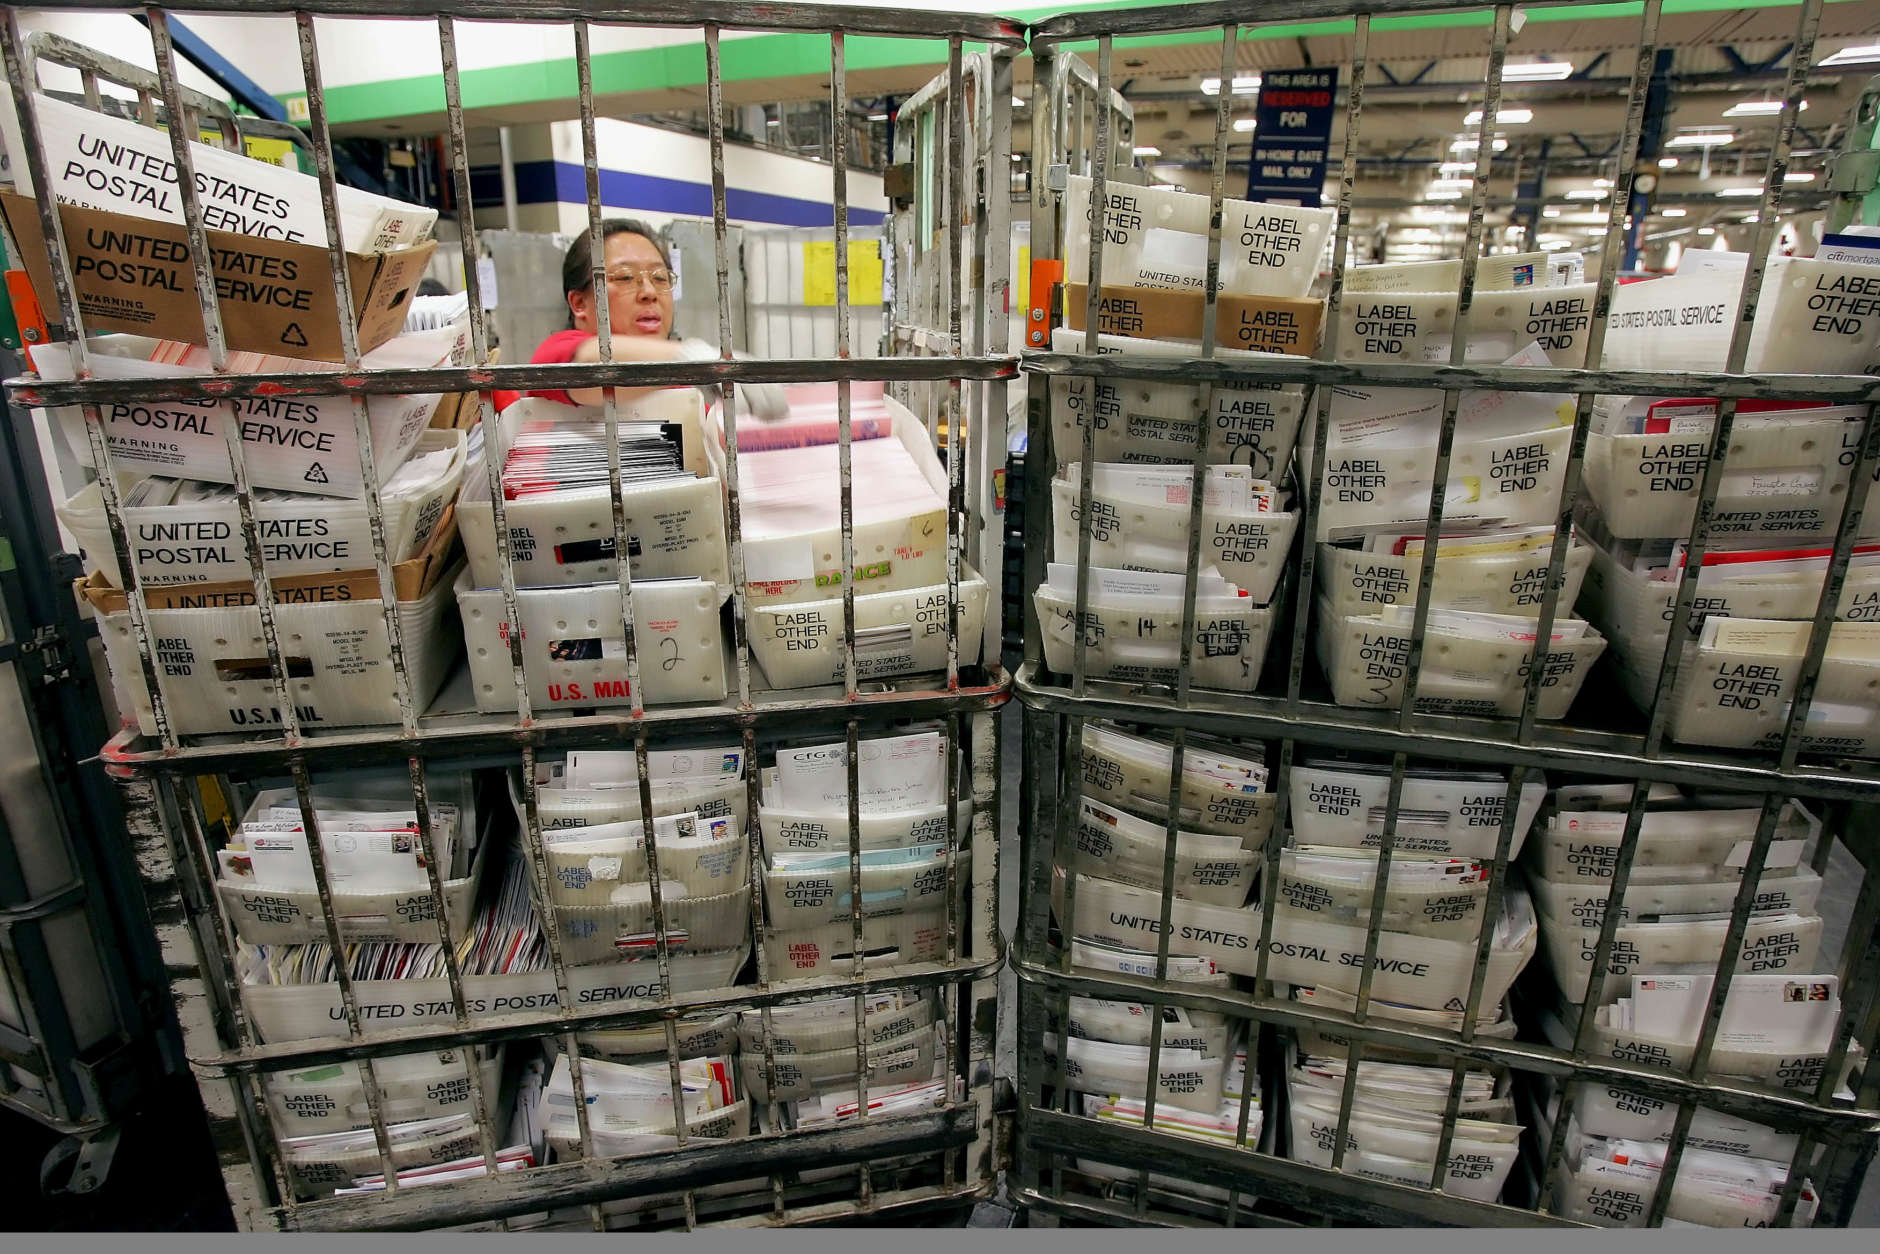 USPS outlines plans for new sorting and delivery centers